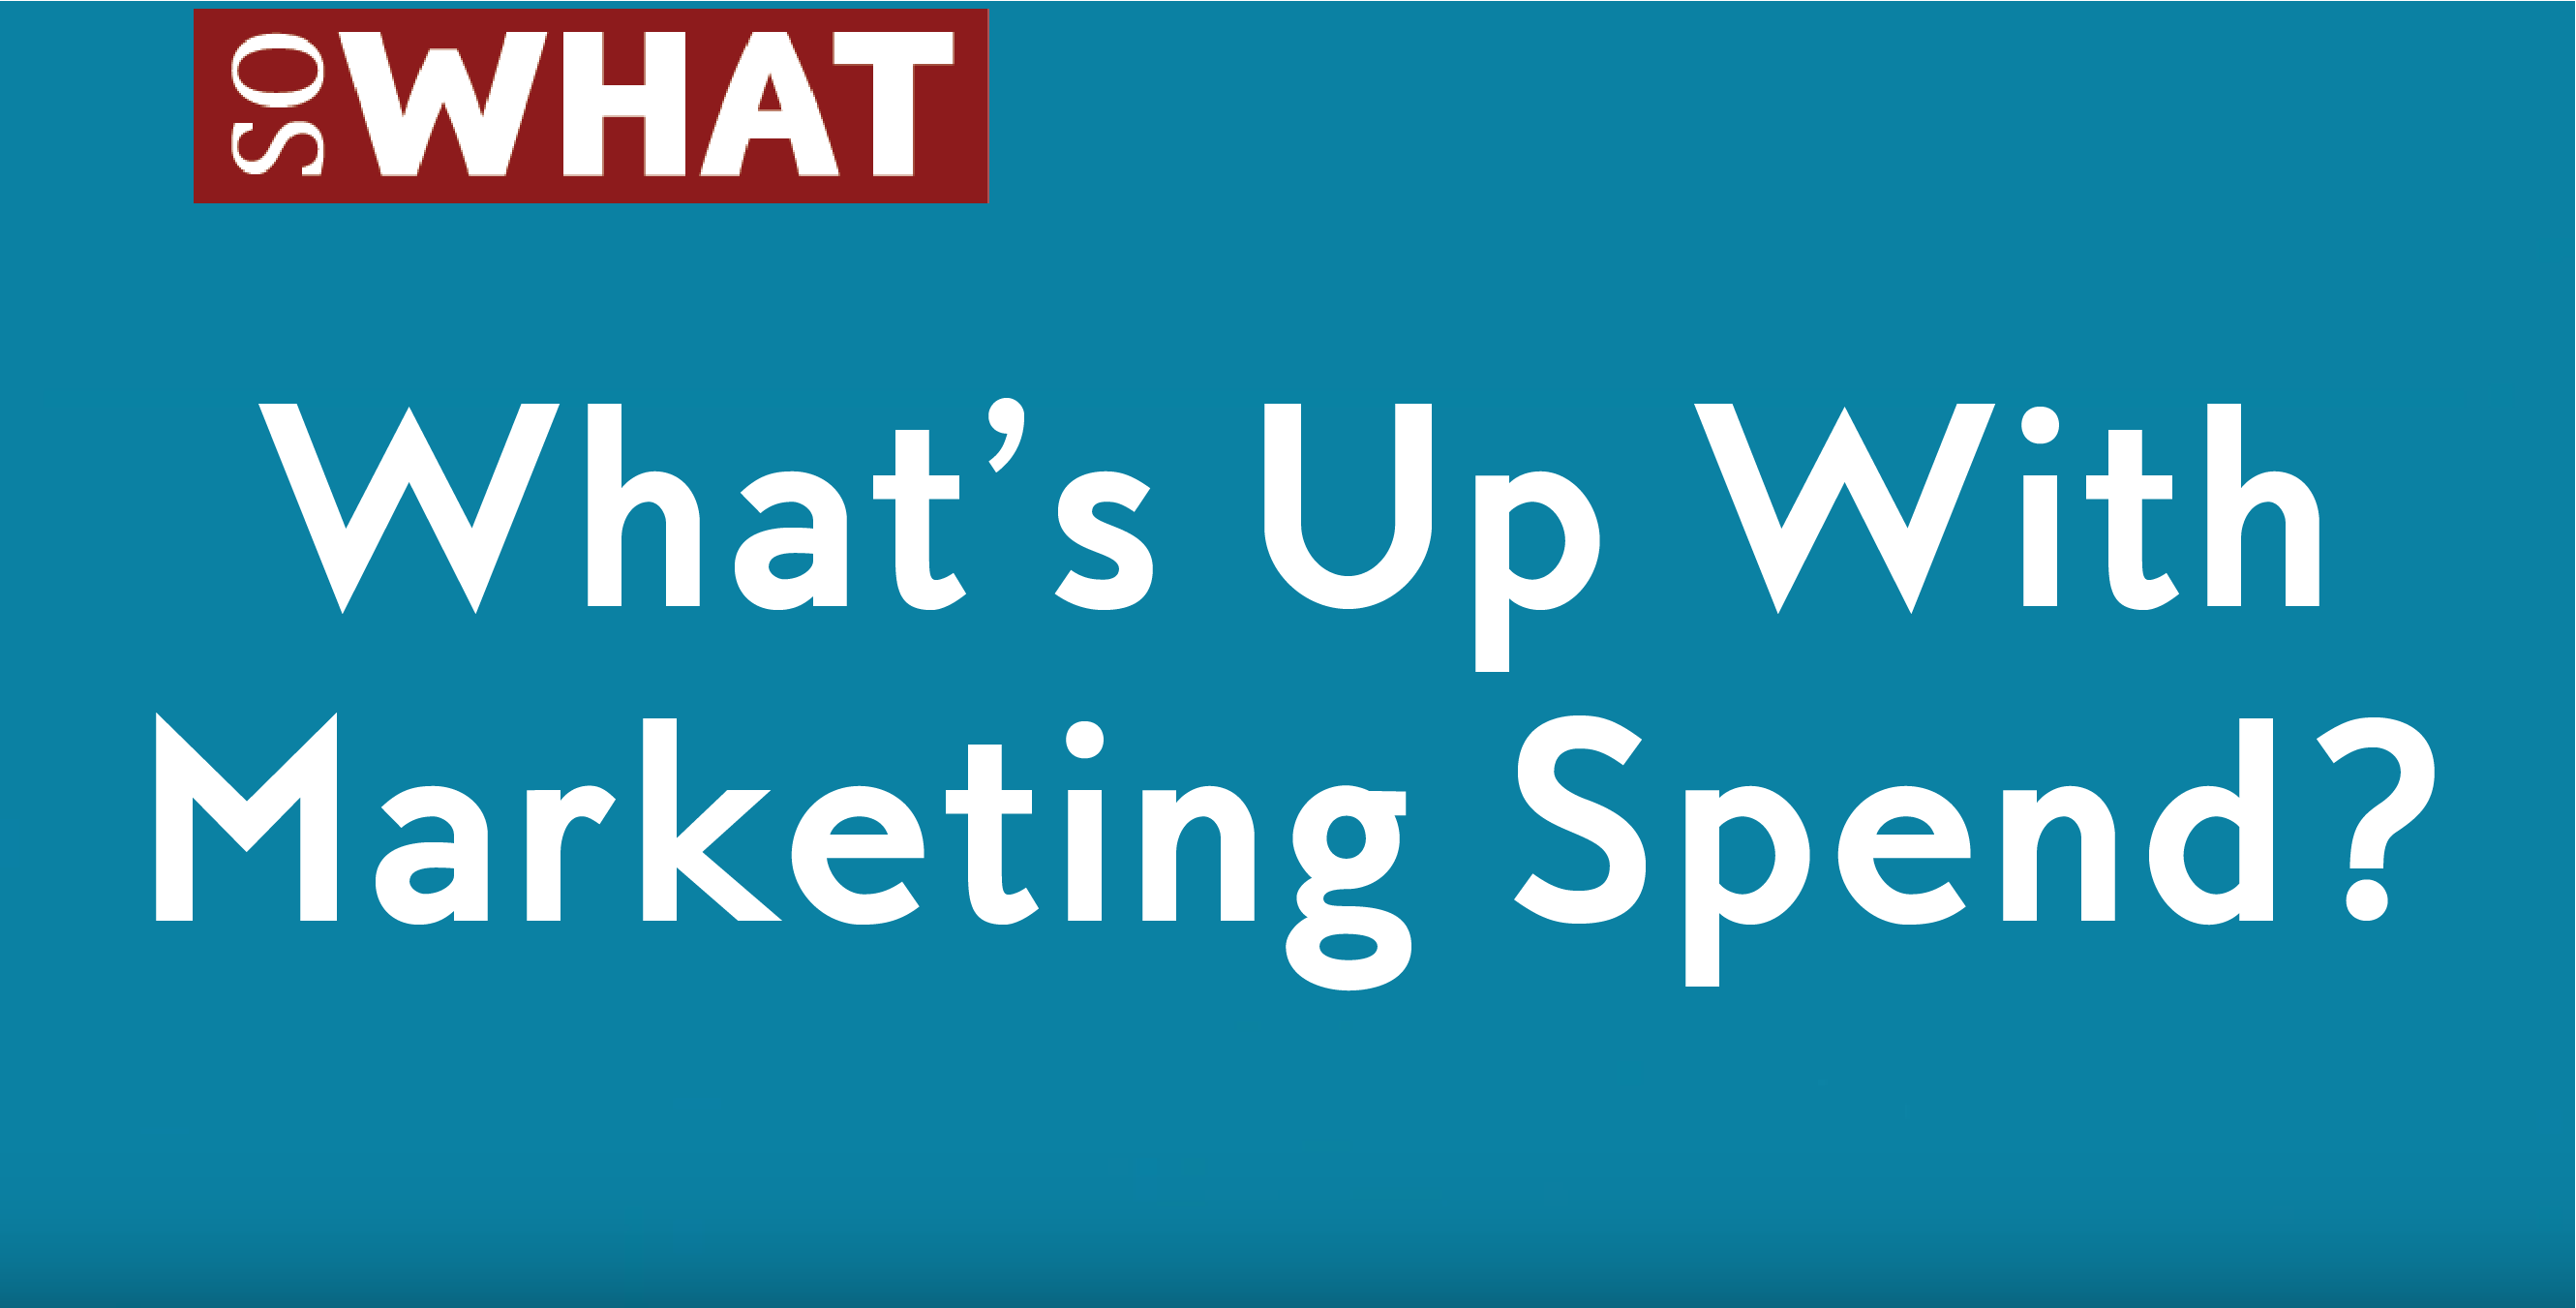 Whats Up with Marketing Spend Thumbanil-01